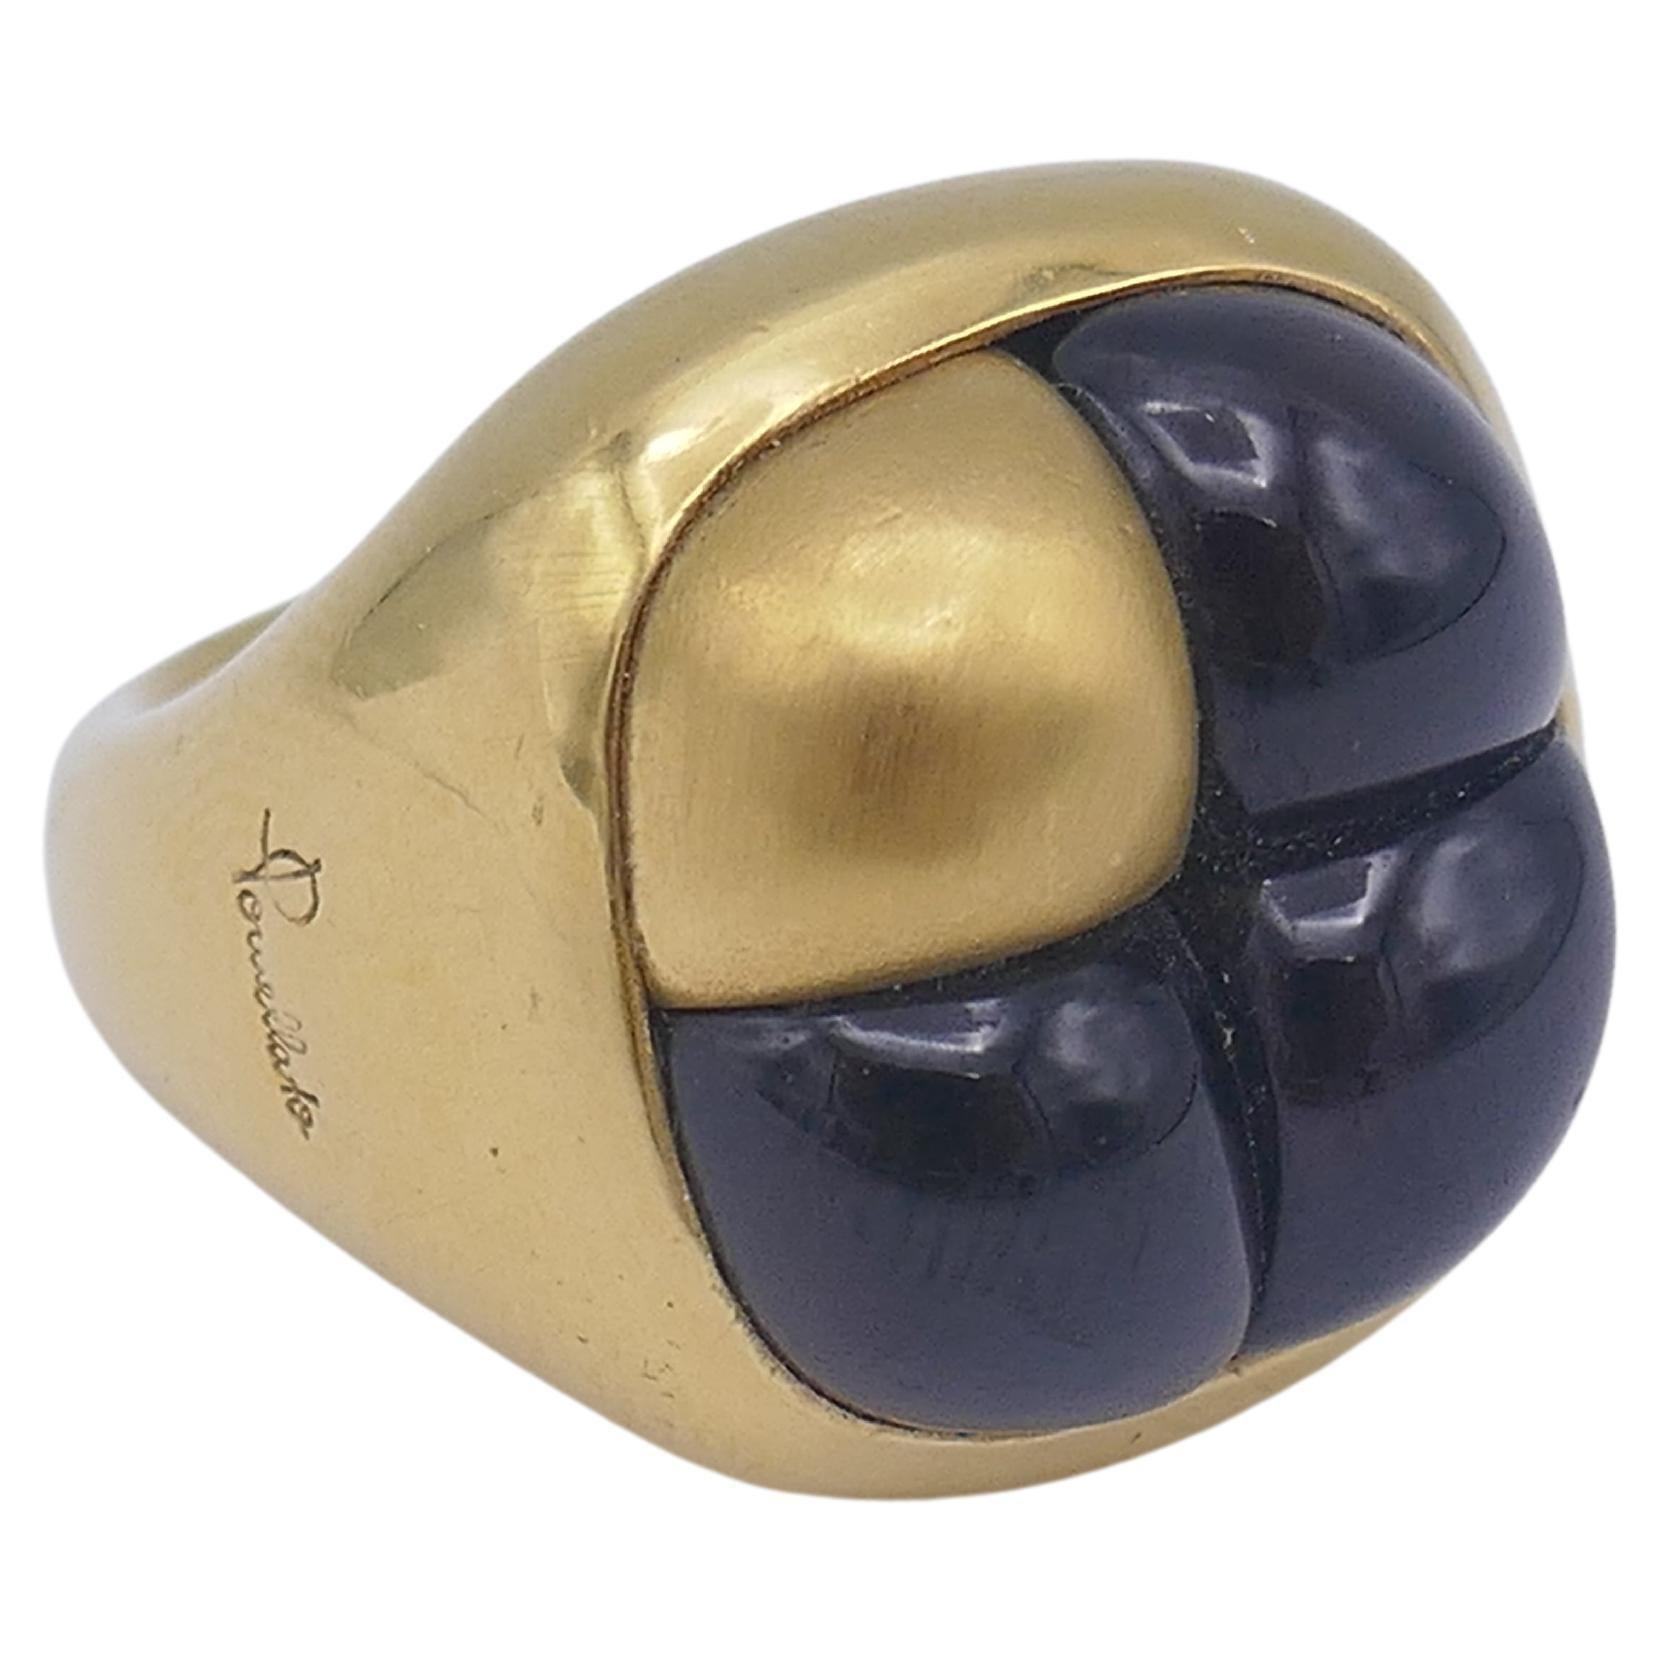 An 18k gold Pomellato garnet ring, from Mosaïco collection.
The dome part has four squar'ish sections. Three sections are garnet and one is gold. The garnet looks almost black and is glowing red while looking from the angle.  It's a unique,